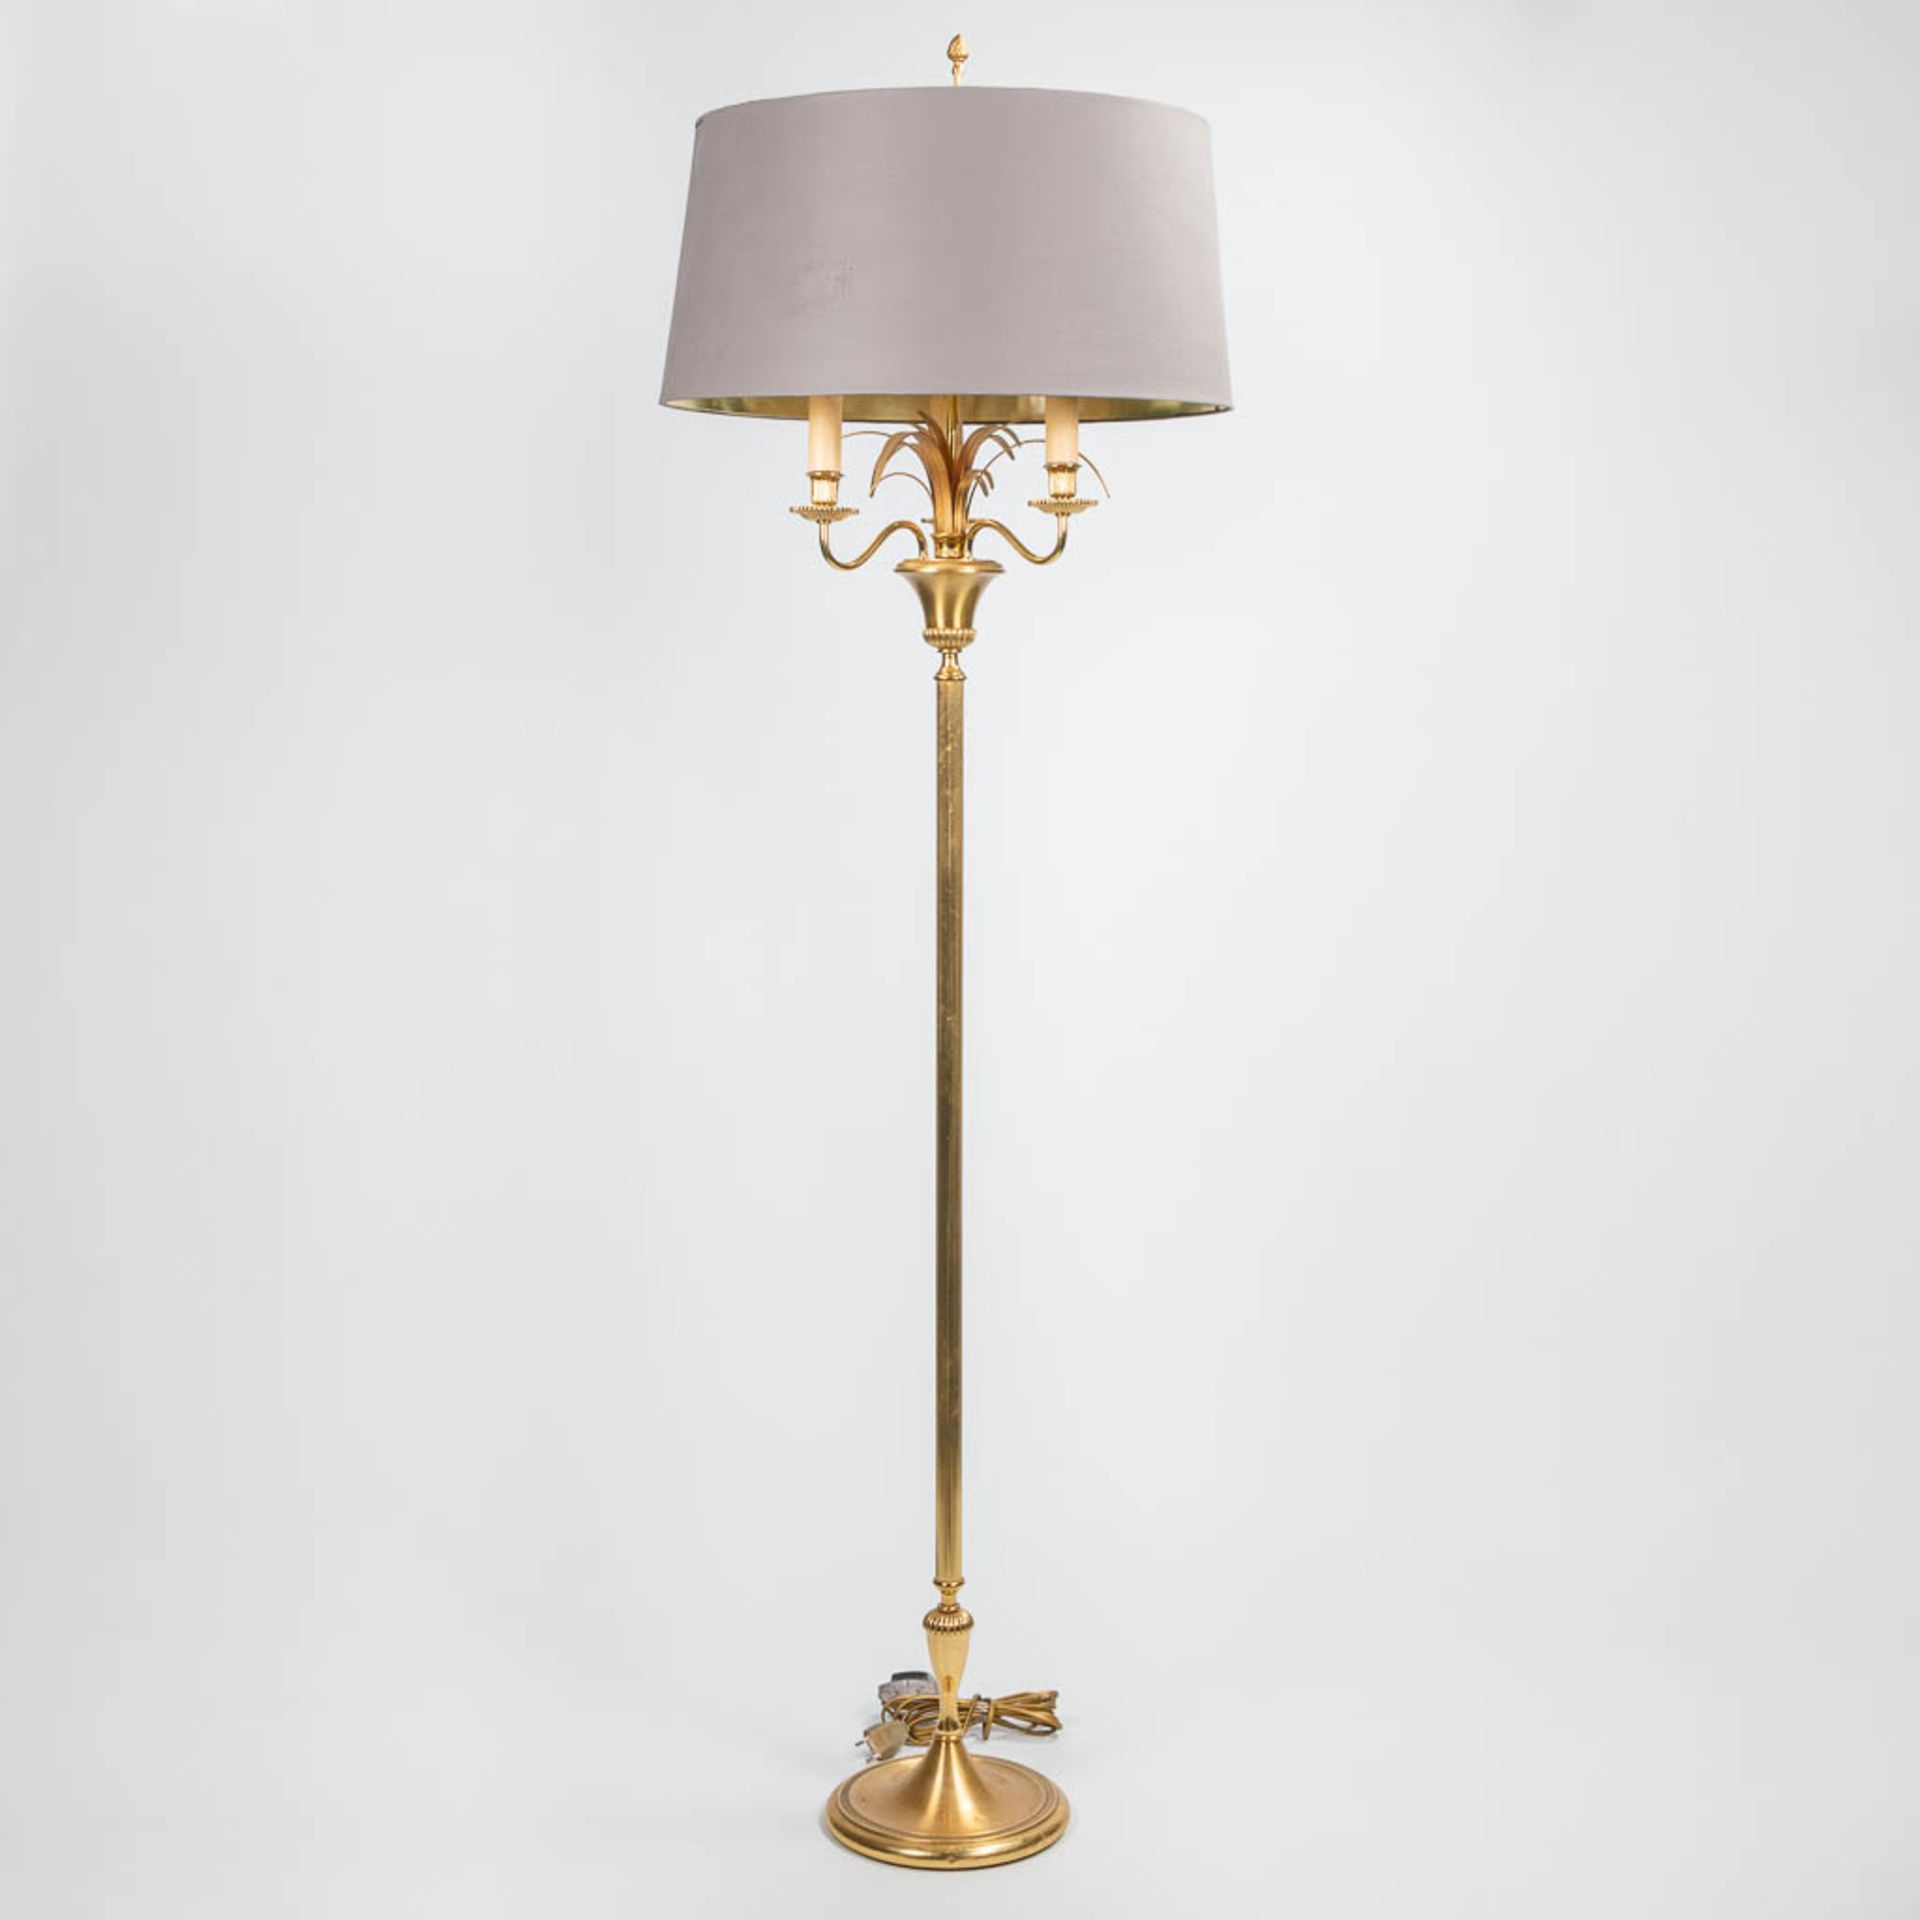 A standing lamp made in Hollywood Regency style. Around 1970. (163 x 34 cm)